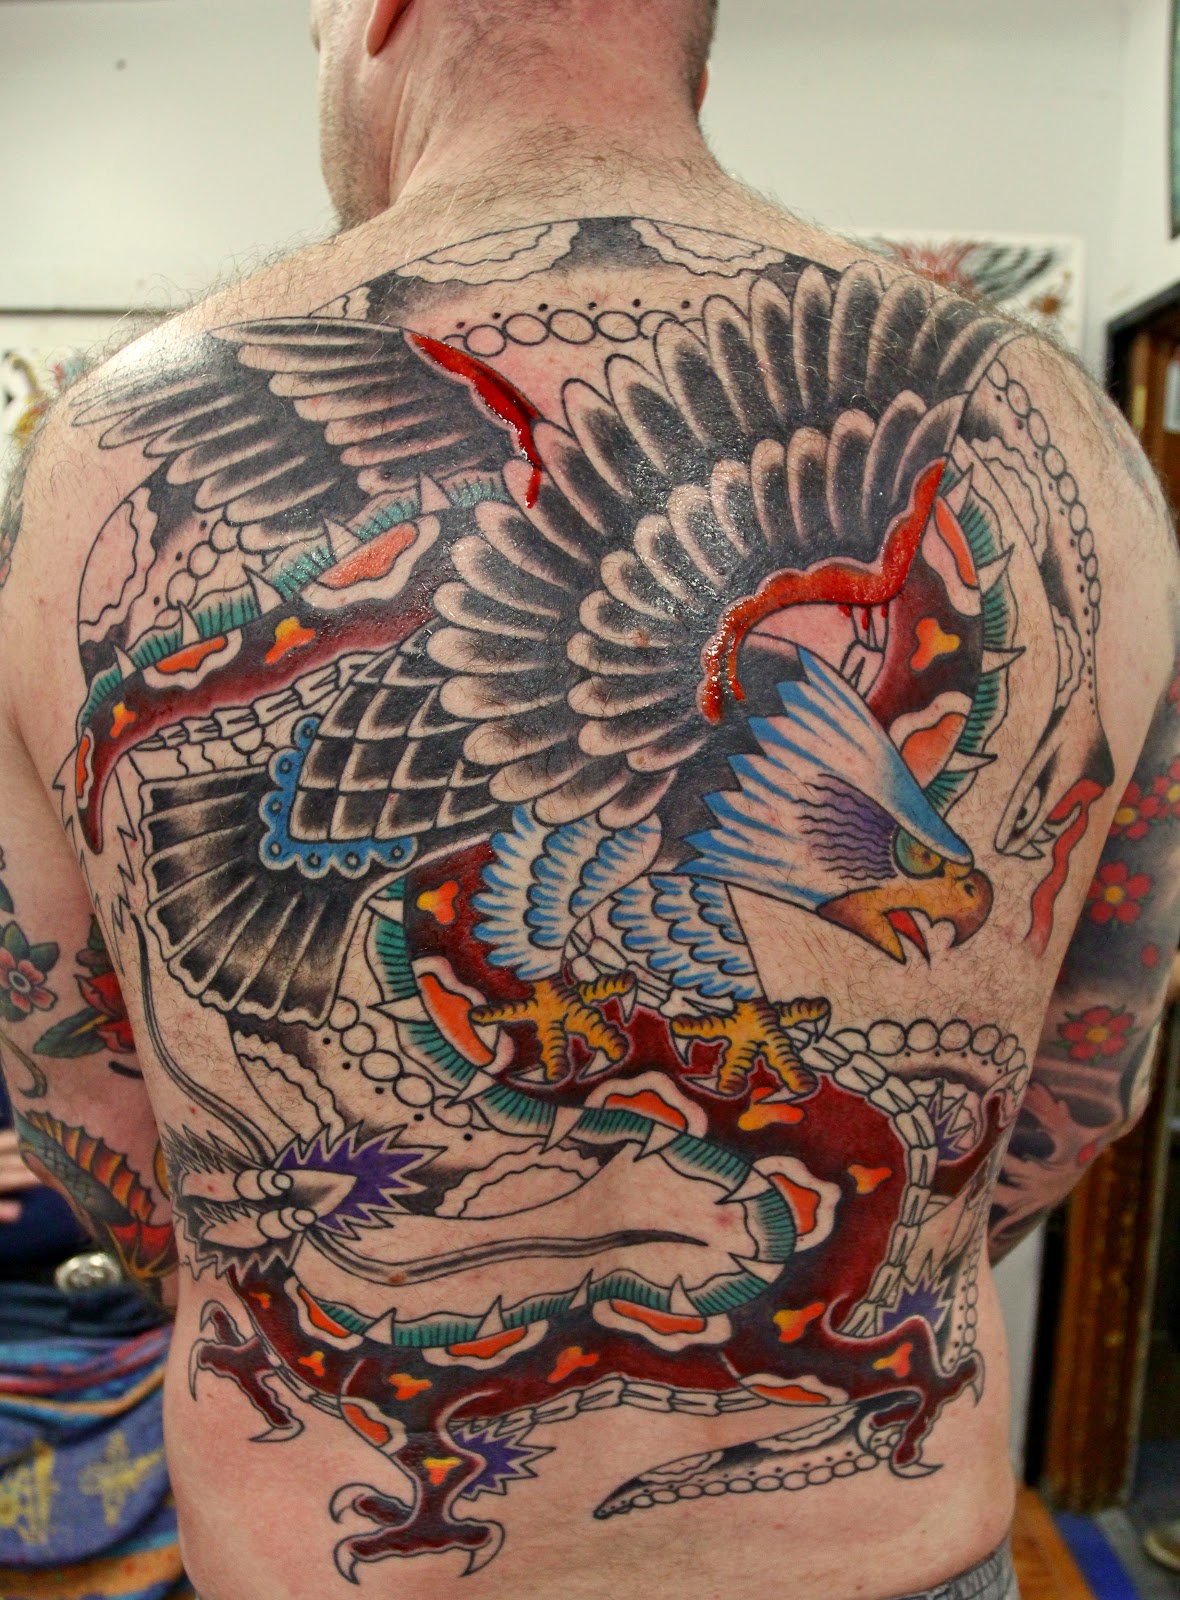 The Battle Royale Tattoo by Bob Roberts: 2013-01-061180 x 1600